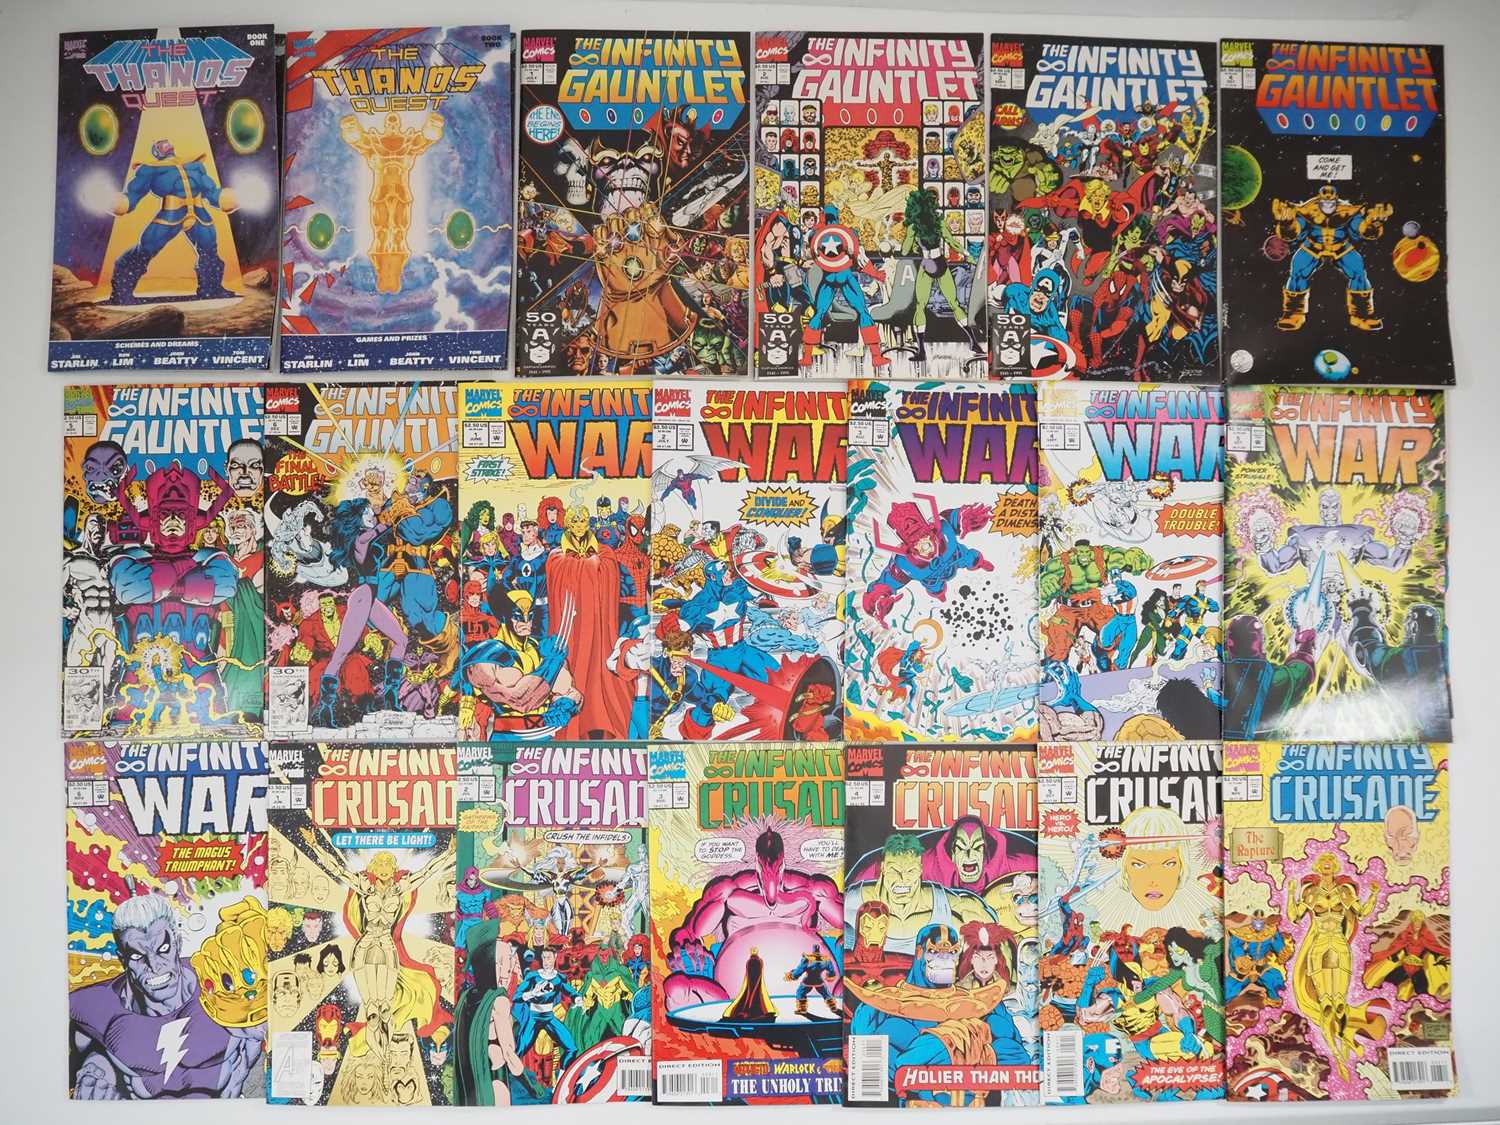 MARVEL INFINITY LOT (20 in Lot) - Includes full runs of THE THANOS QUEST #1 & 2 (1990) + THE